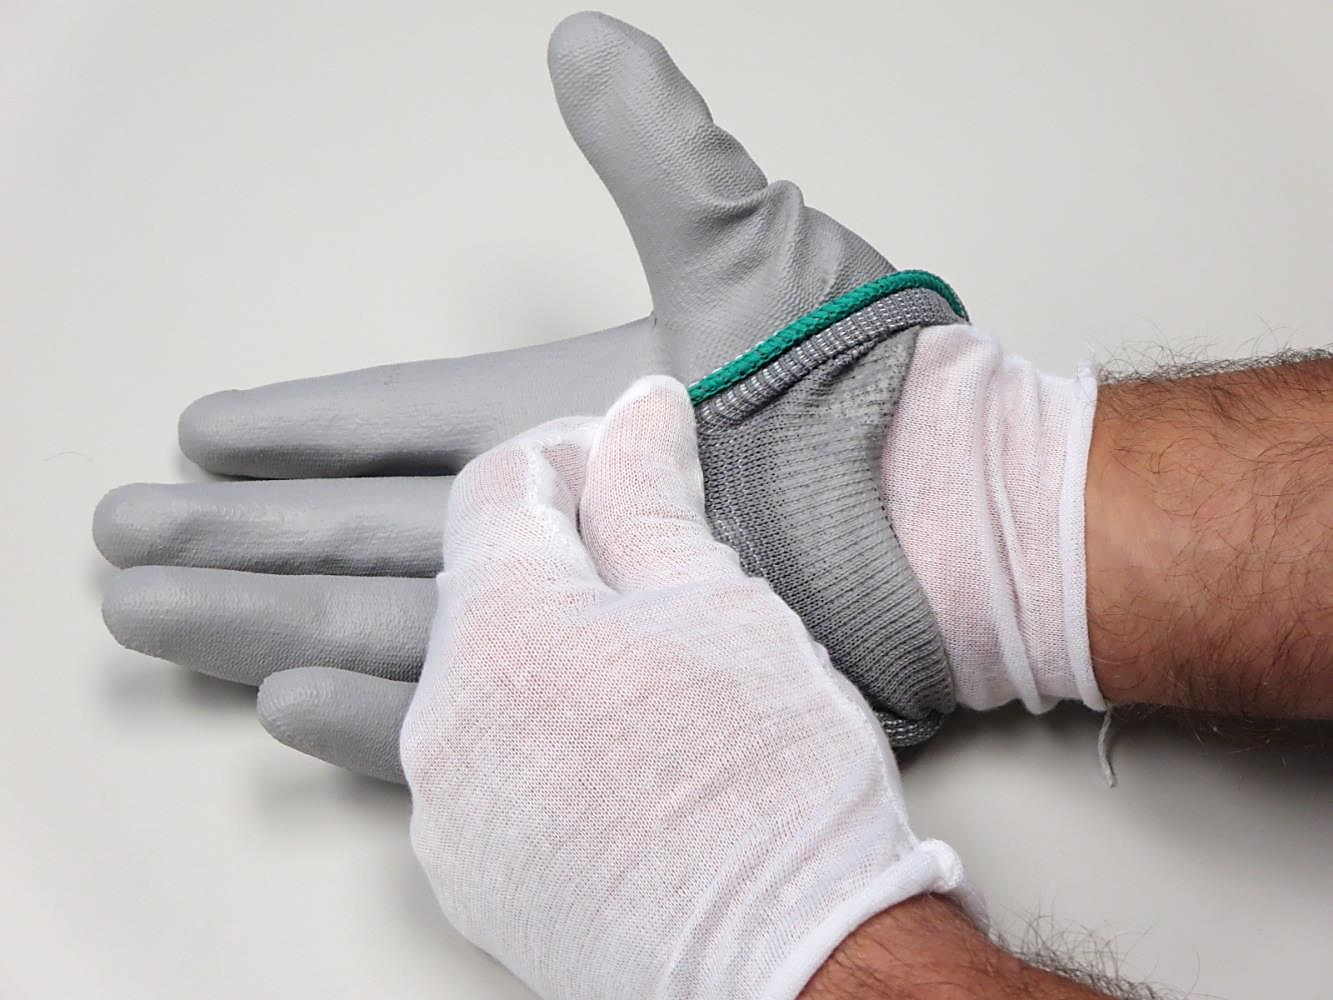 PIP 22-770 Claw Cover Dyneema Antimicrobial Gloves